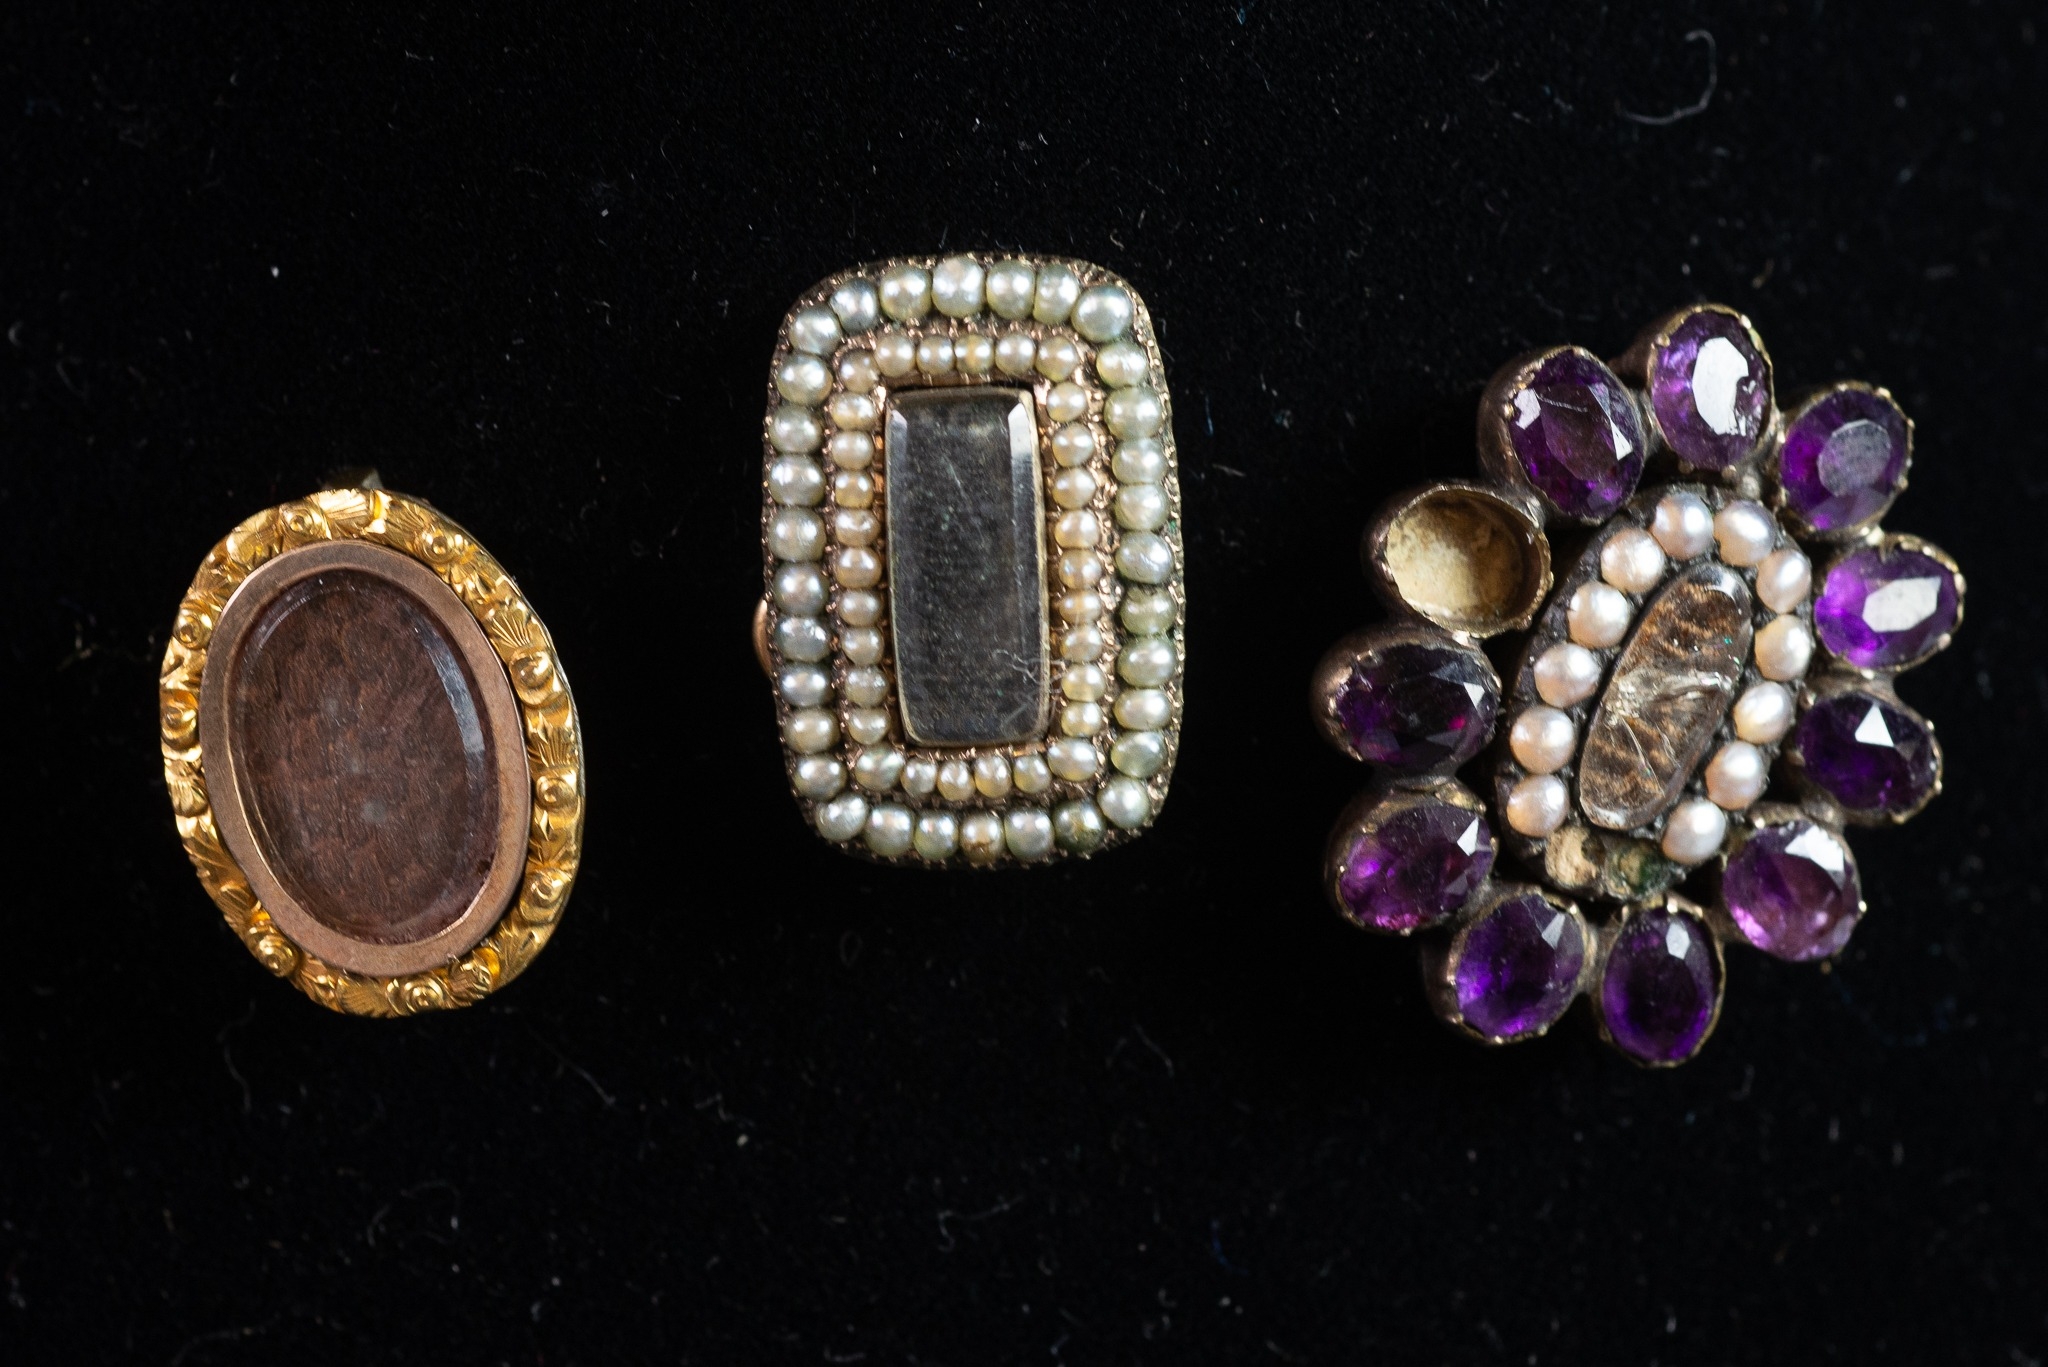 THREE SMALL VICTORIAN BROOCHES each with a glazed hair locket brooches, one oblong with double row